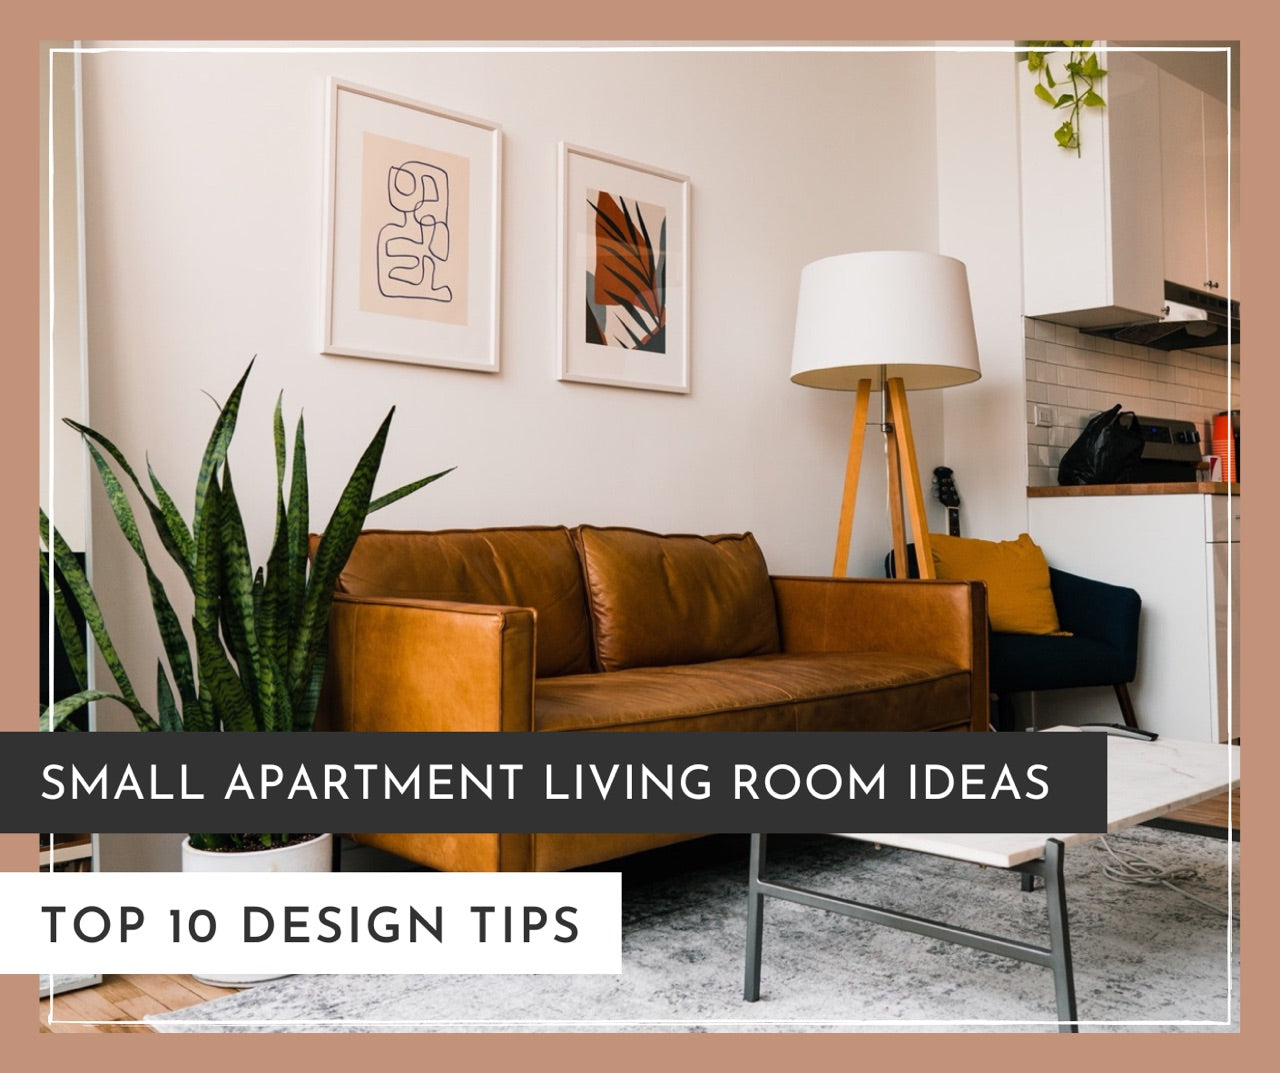 Small living room furniture - how to choose the best pieces for a tiny  space